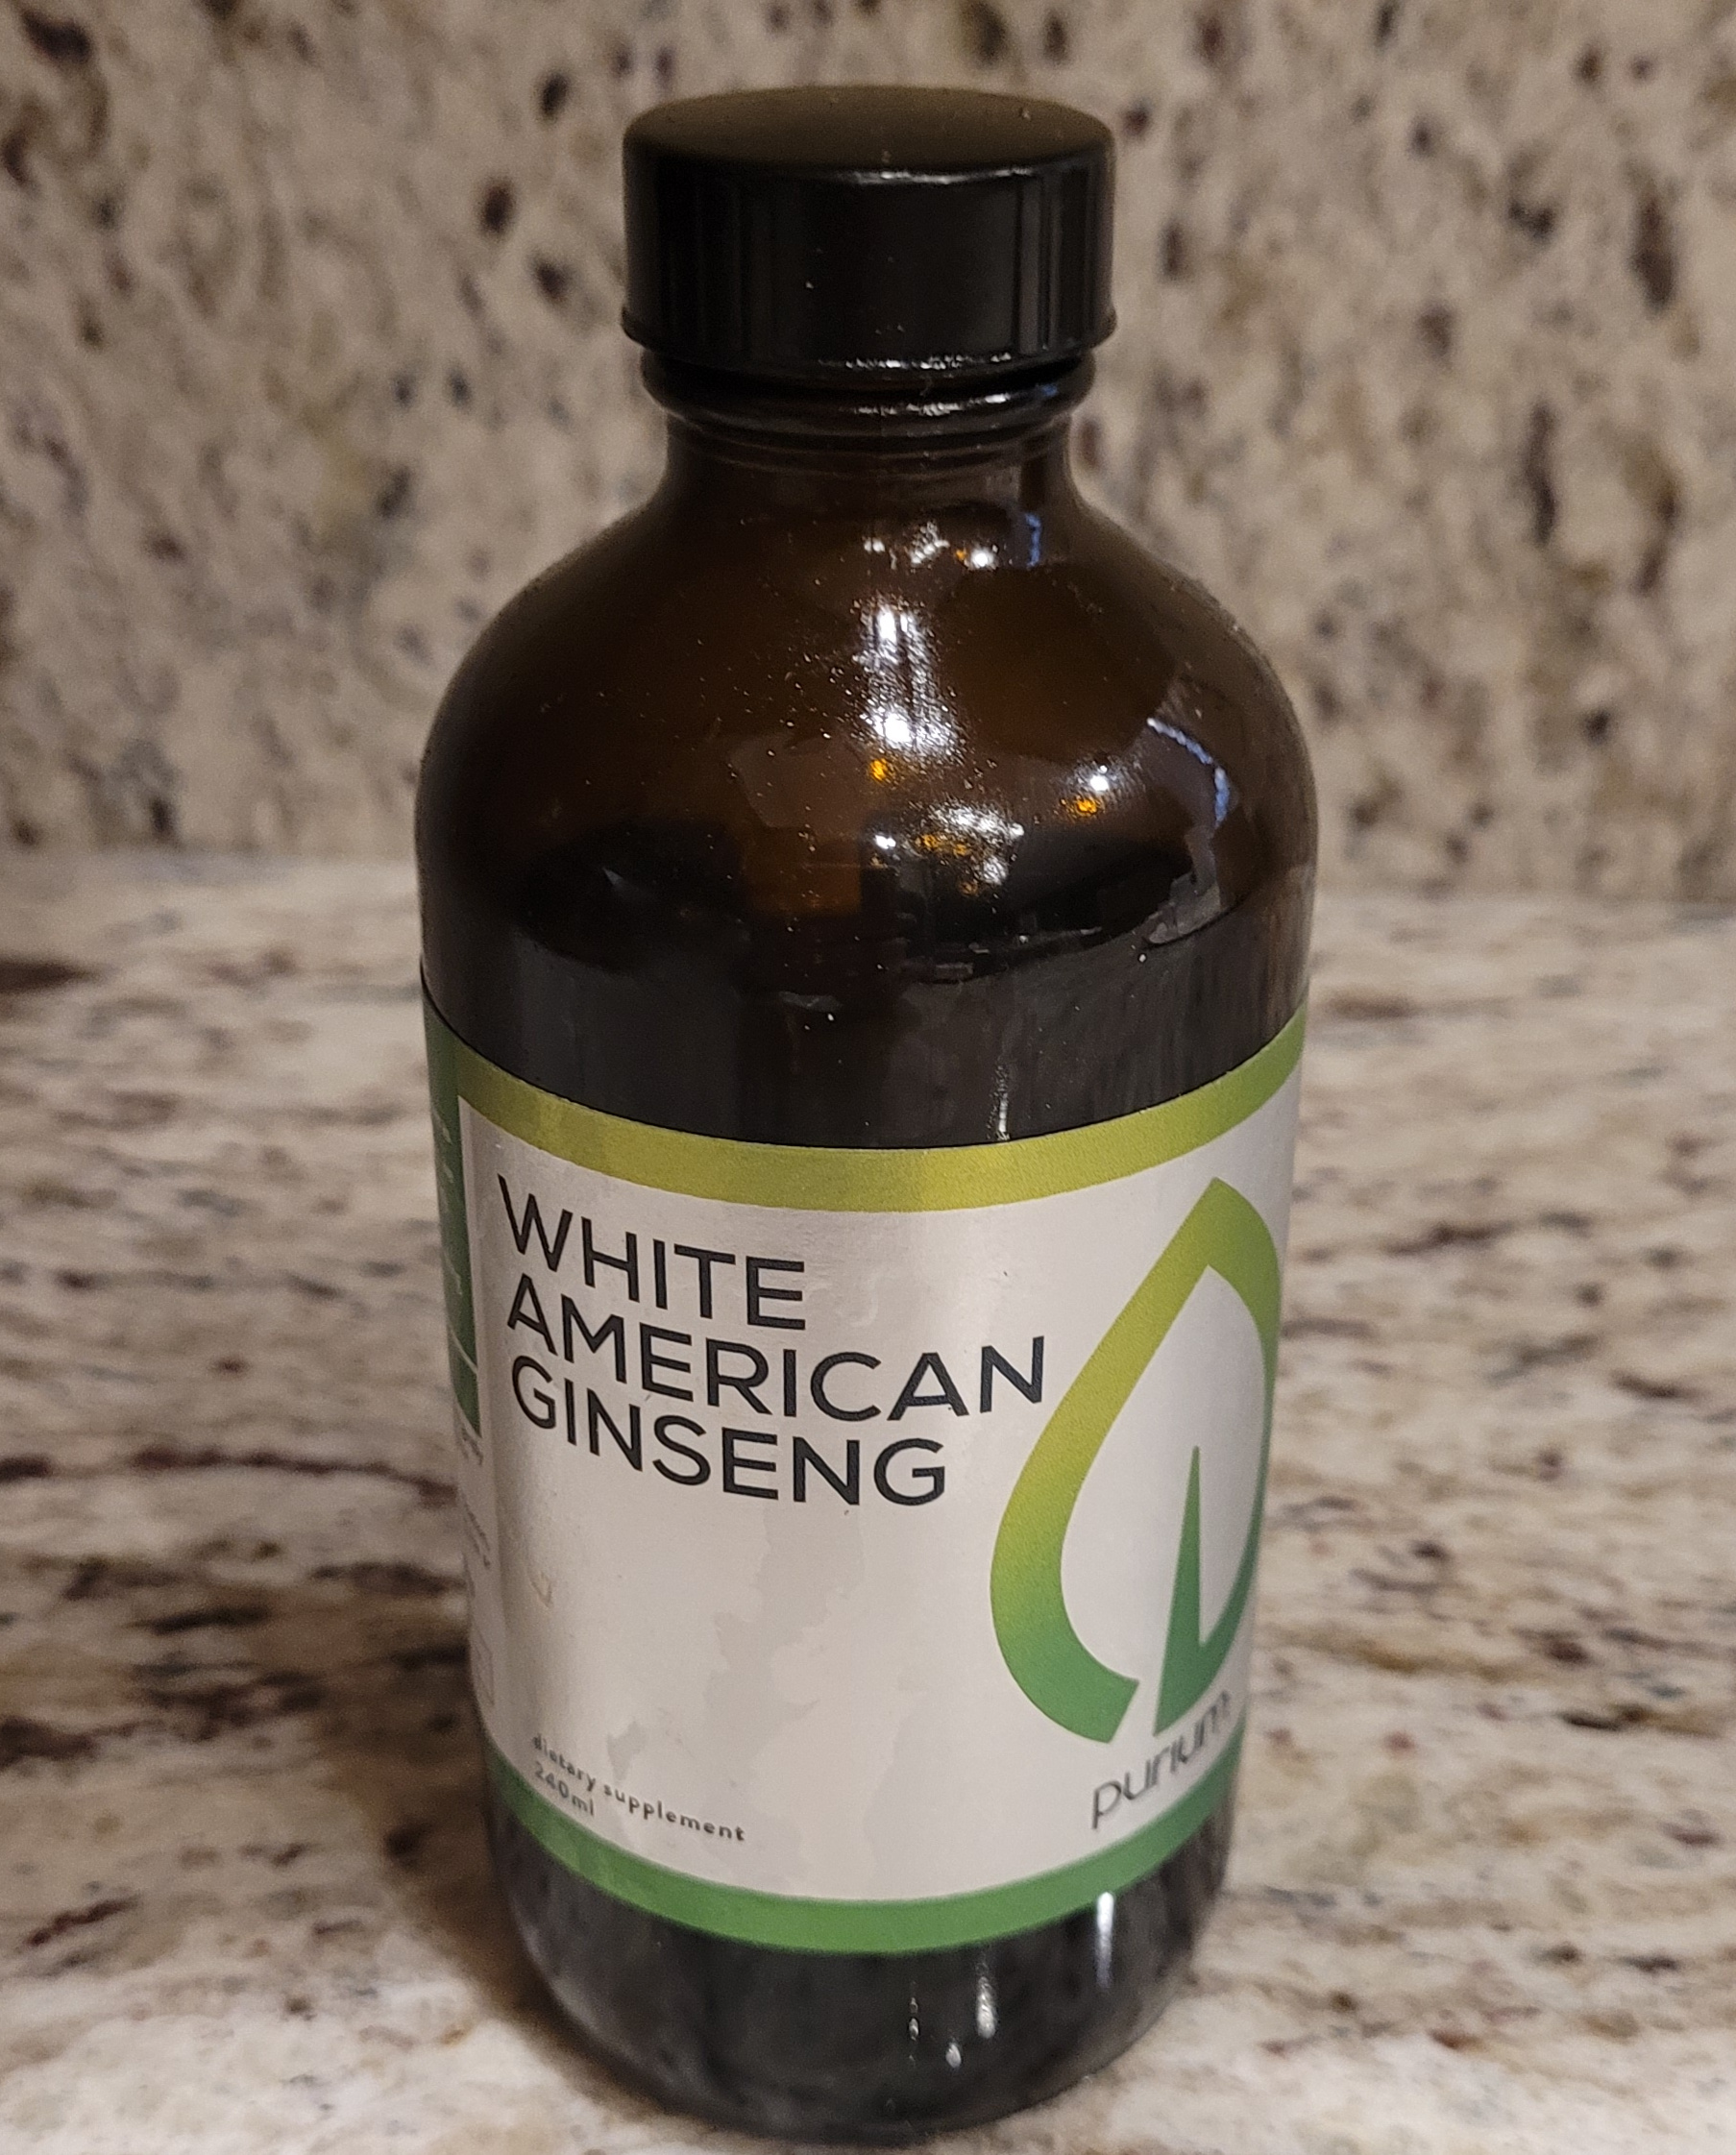 White American Ginseng Extract